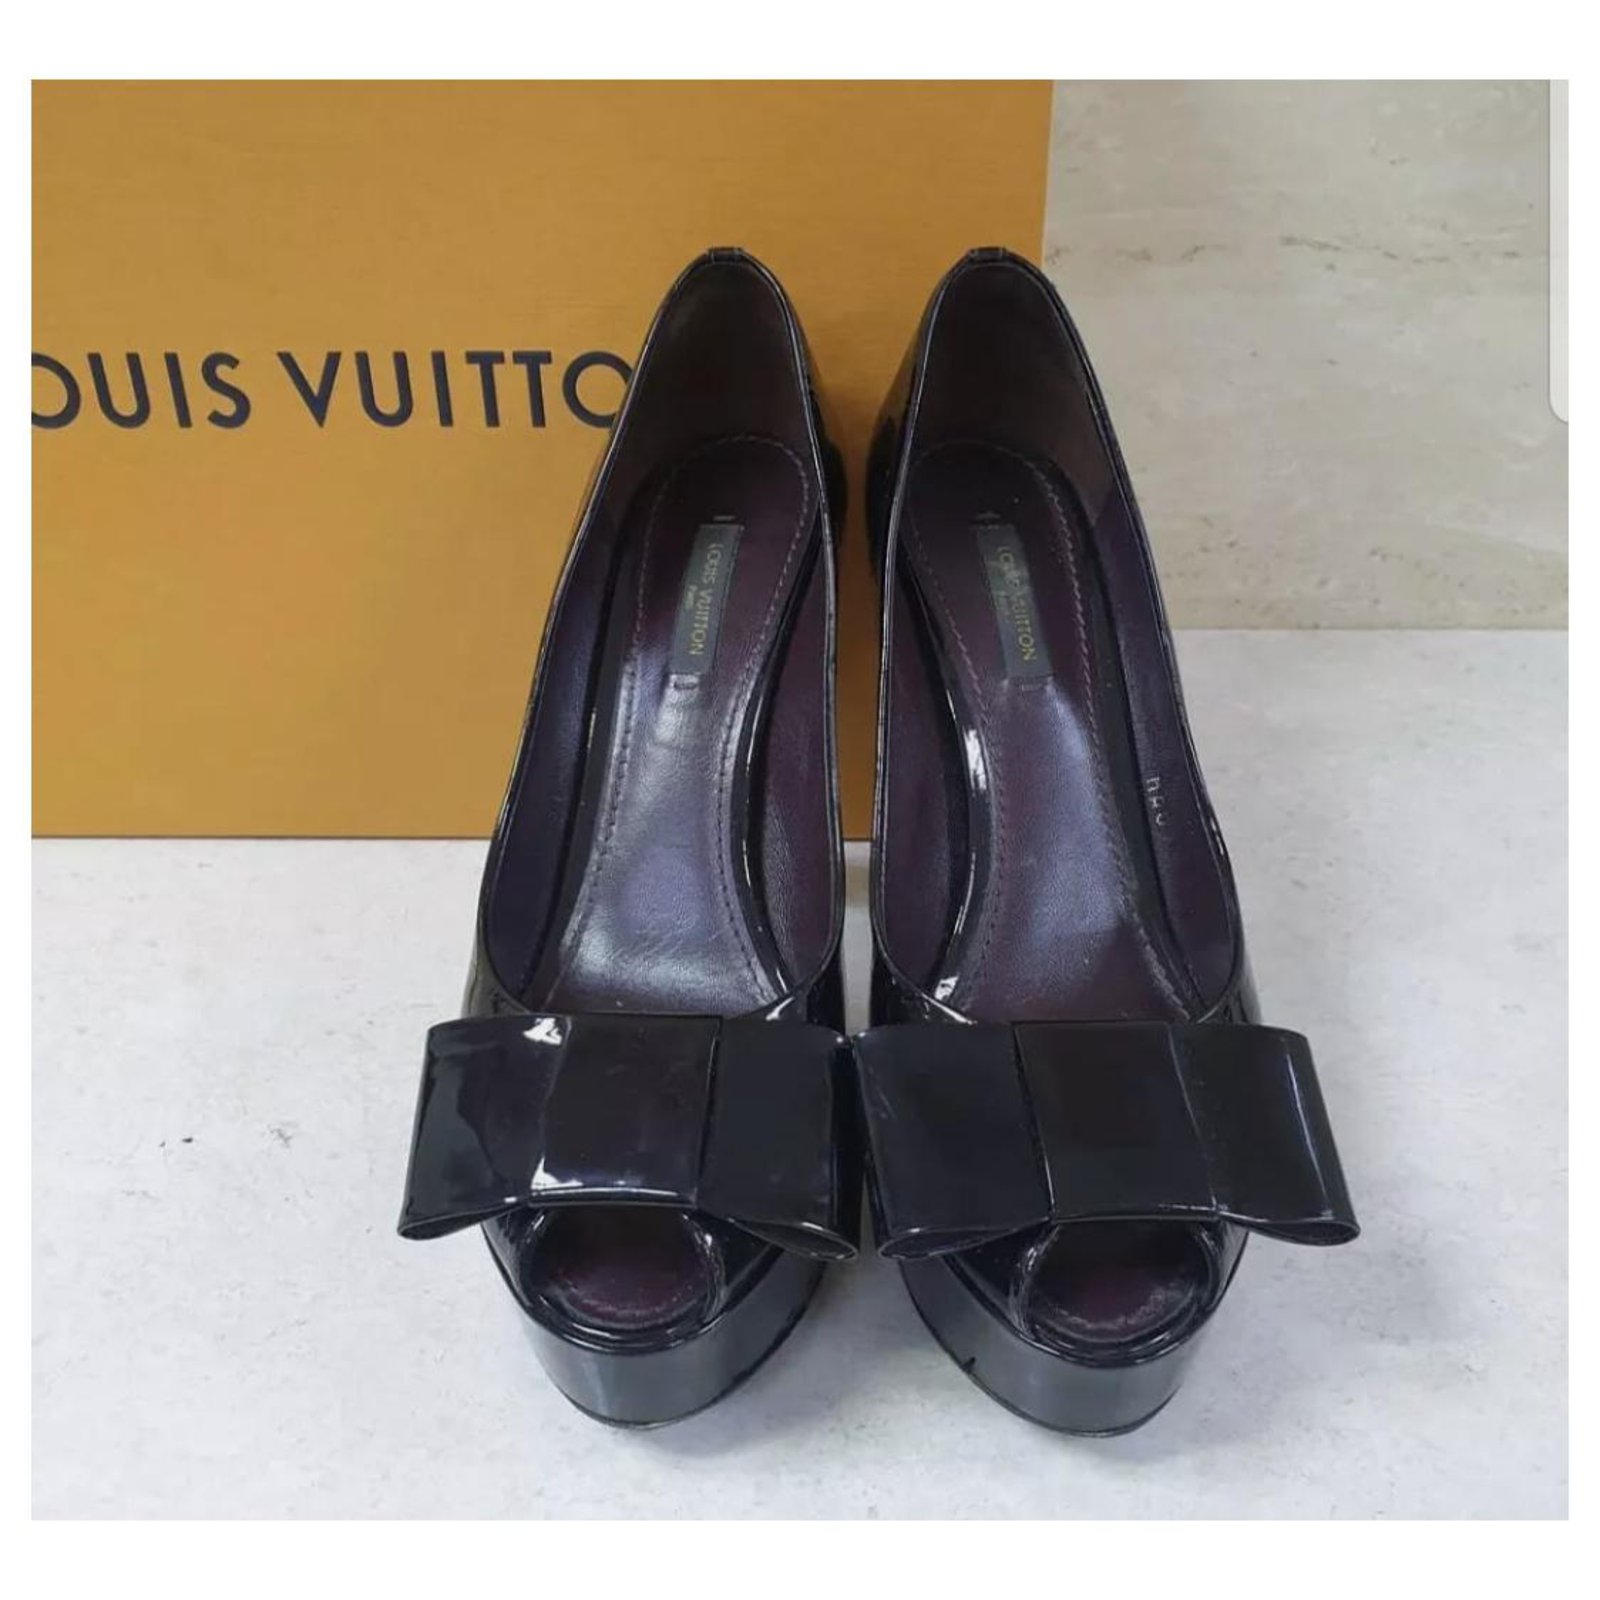 louis vuitton Amarante is Mo Patent Leather Pantheon wedges